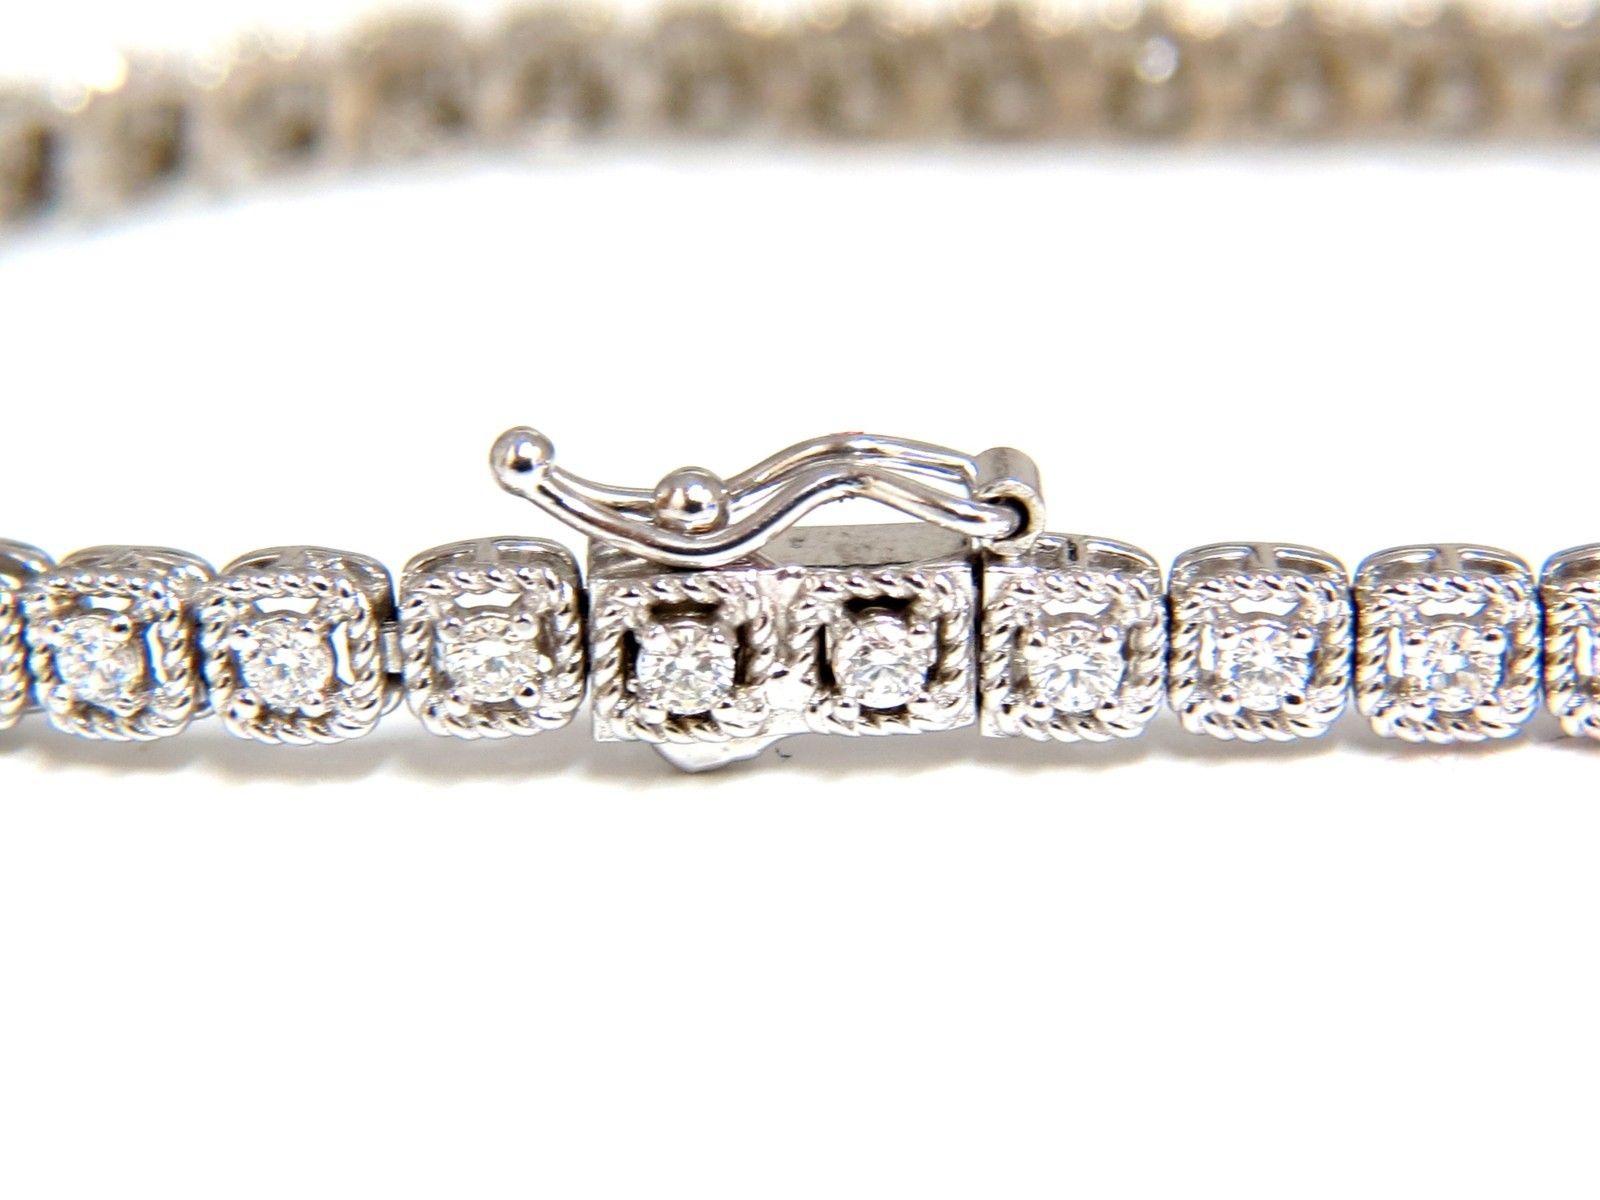 Tennis Box, Rope Twist

1.08ct. Natural  diamonds bracelet.

Round, full cuts 

F/G color 

Vs-2 clarity.

14kt. white gold 

8.8 Grams.

Width of bracelet: 3.7mm

7 inch wearable length

safety clasp/ snap lock

$4,000 Appraisal Certificate will